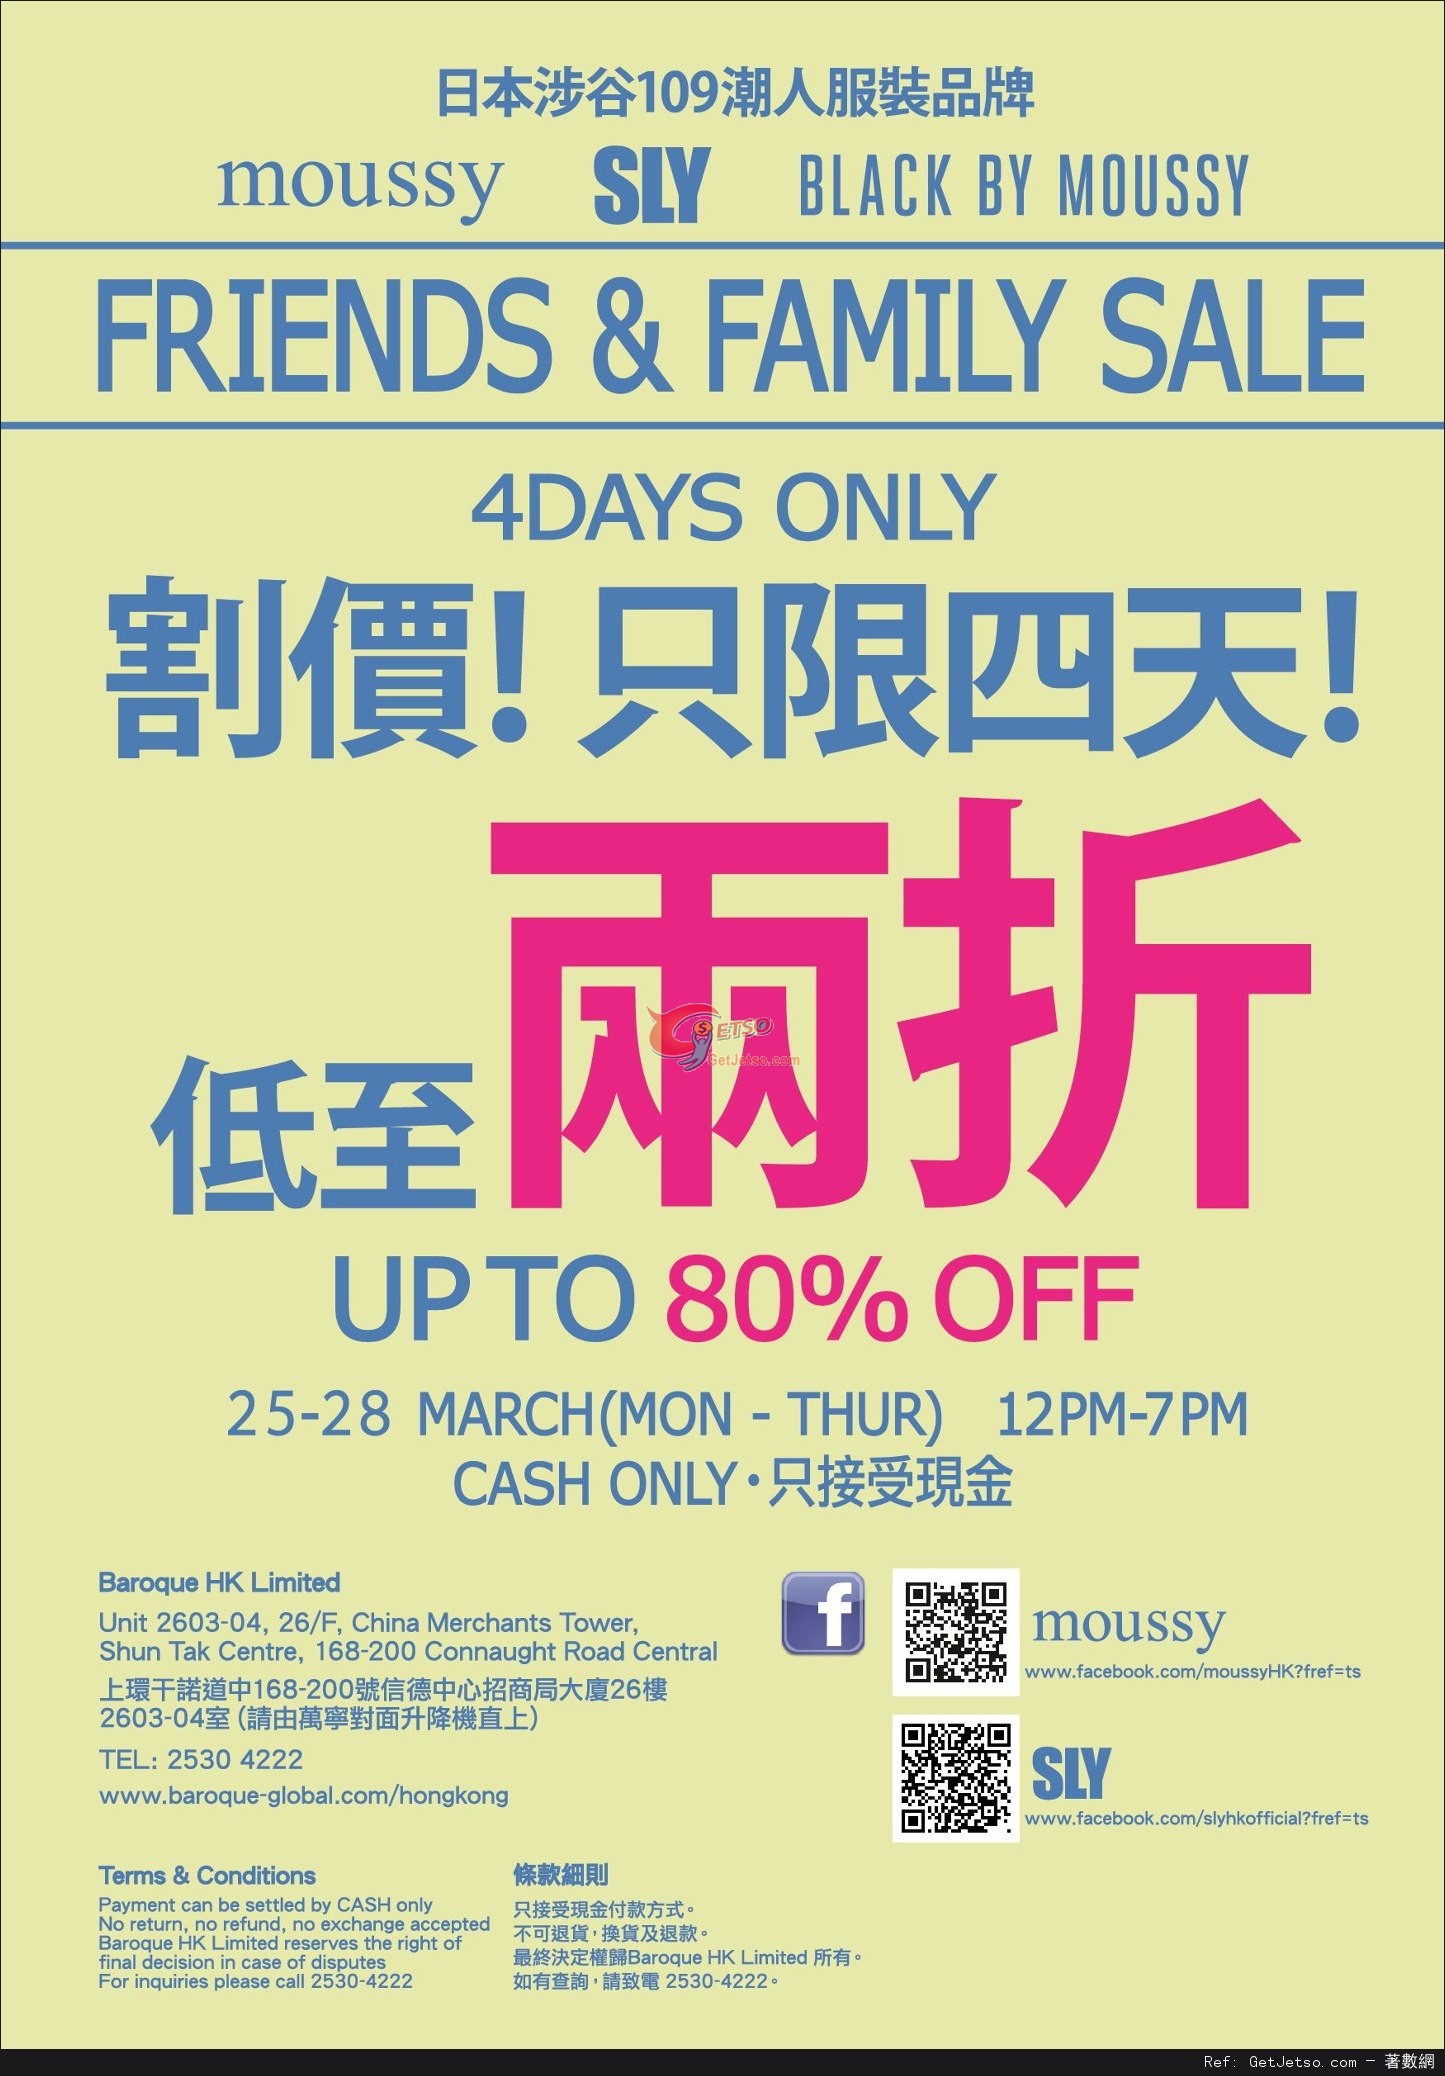 Moussy/SLY/Black By Moussy FRIENDS N'FAMILY SALE 低至2折優惠 - Get Jetso 著數優惠網